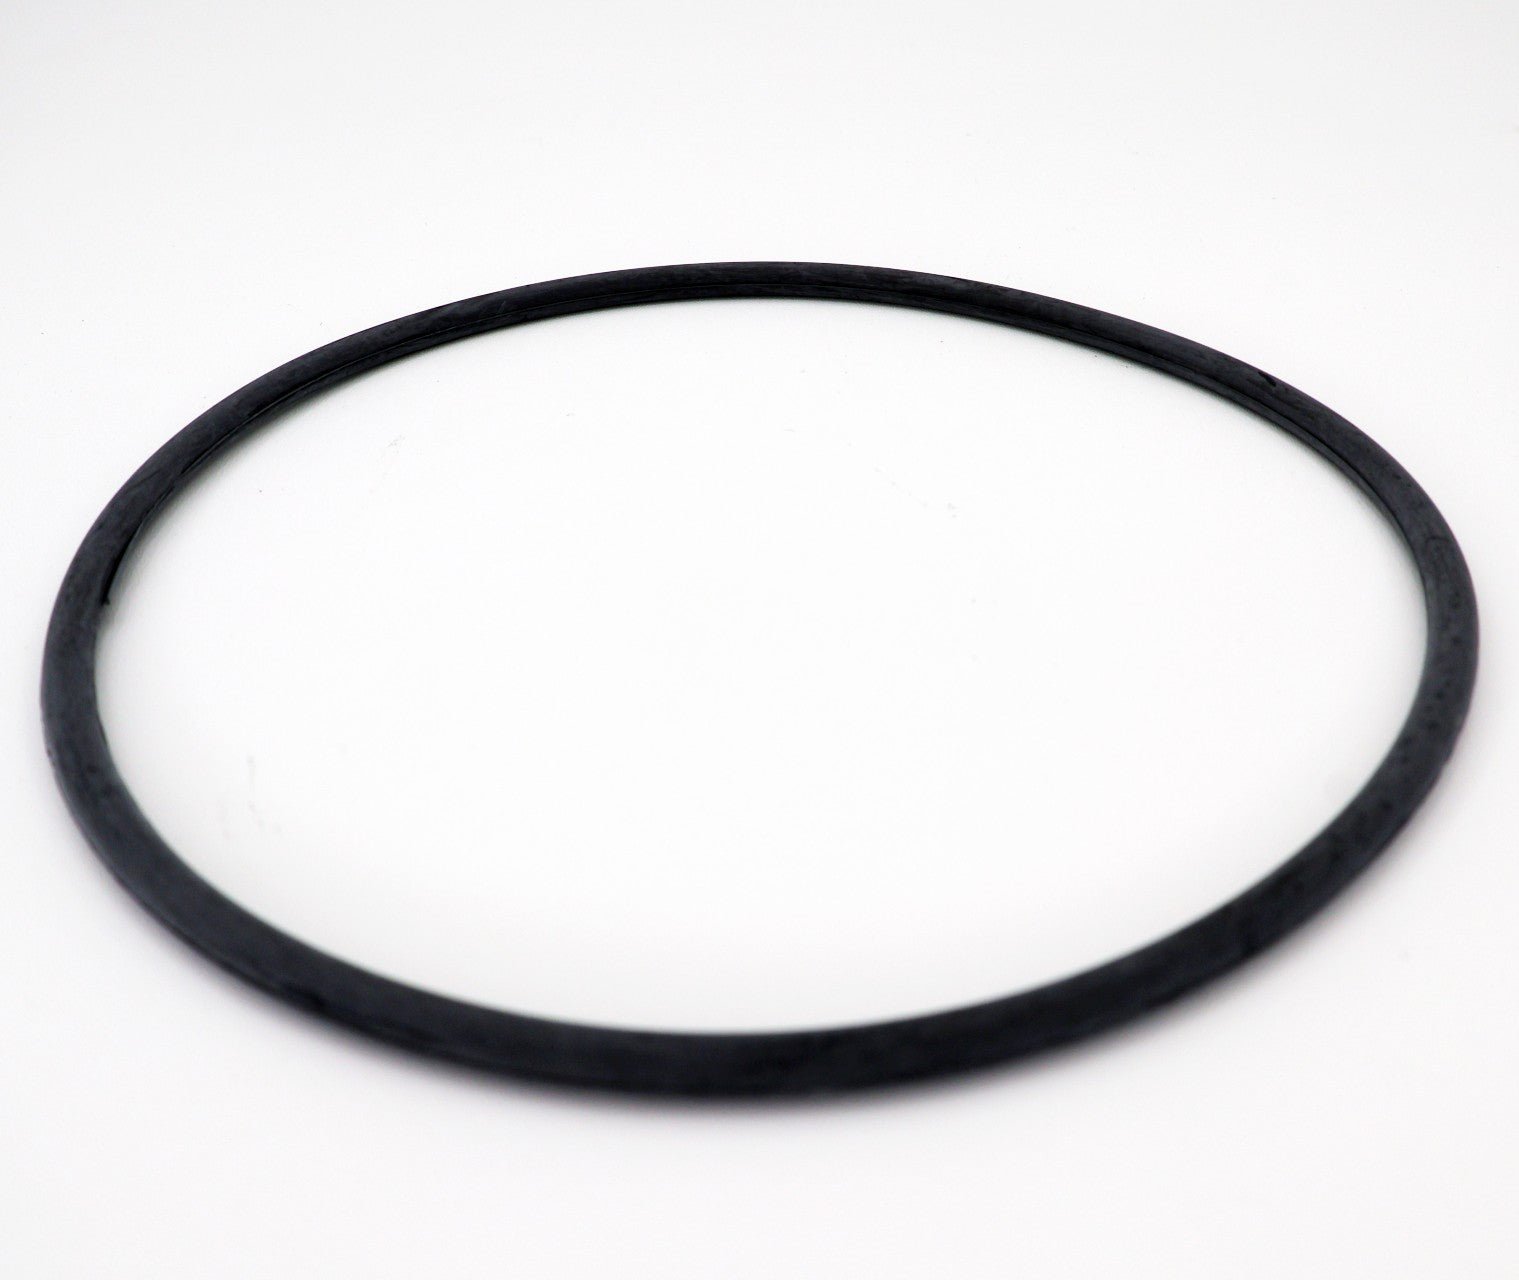 Jandy (Polaris) Lid O-Ring for Forza Aboveground Pump R0968900 - Pool Pump Parts - img-2